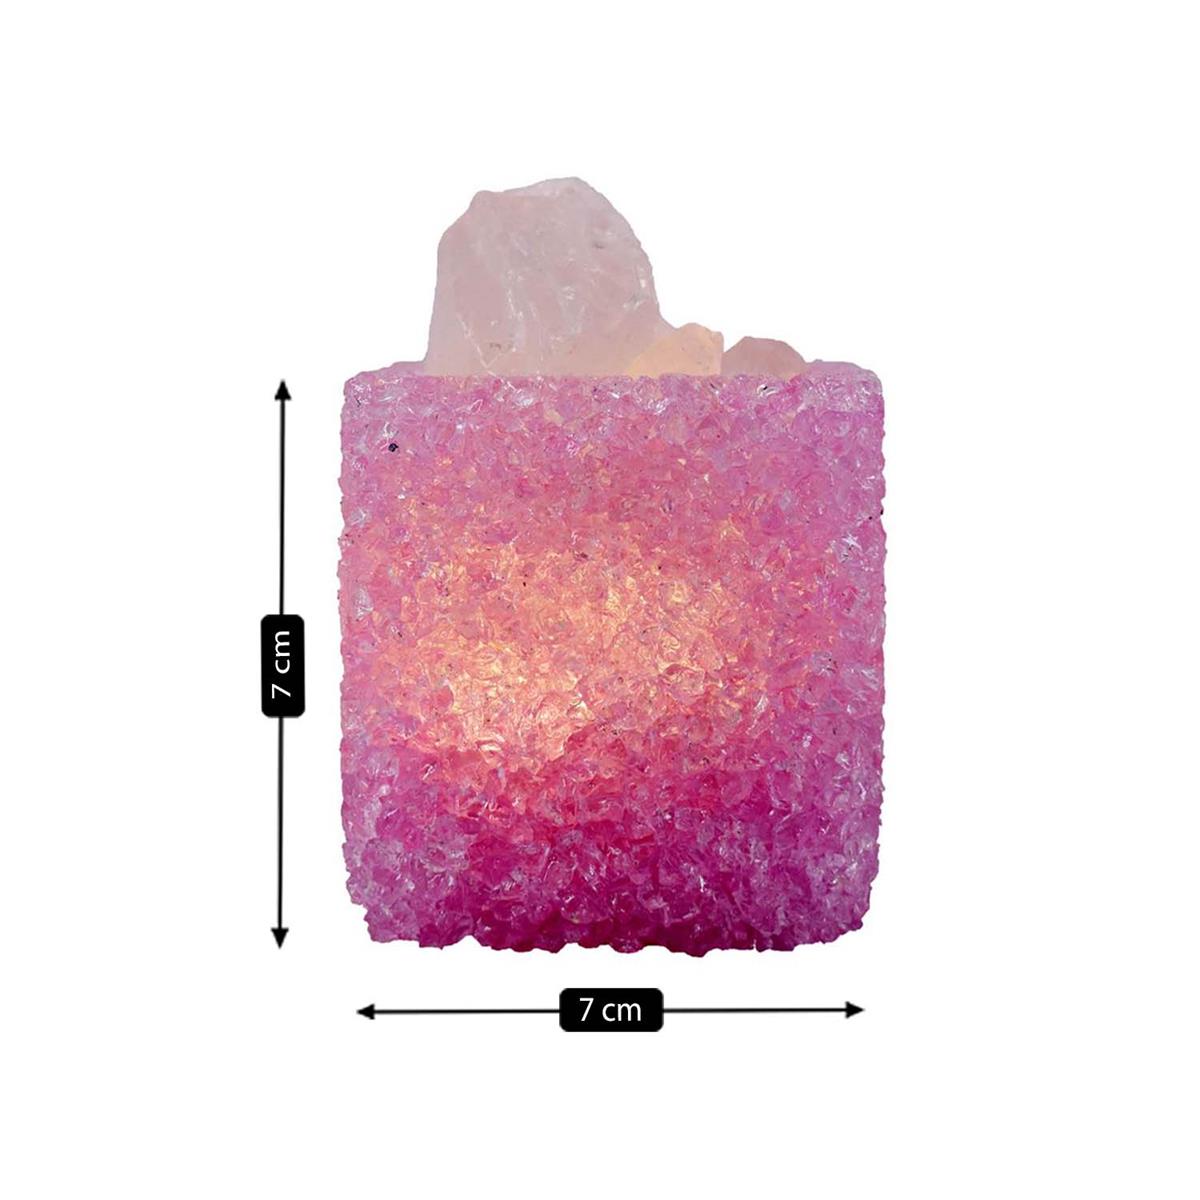 Natural Crystal Aromatherapy with Essential Oil, Electric Diffuser (087-5-D)